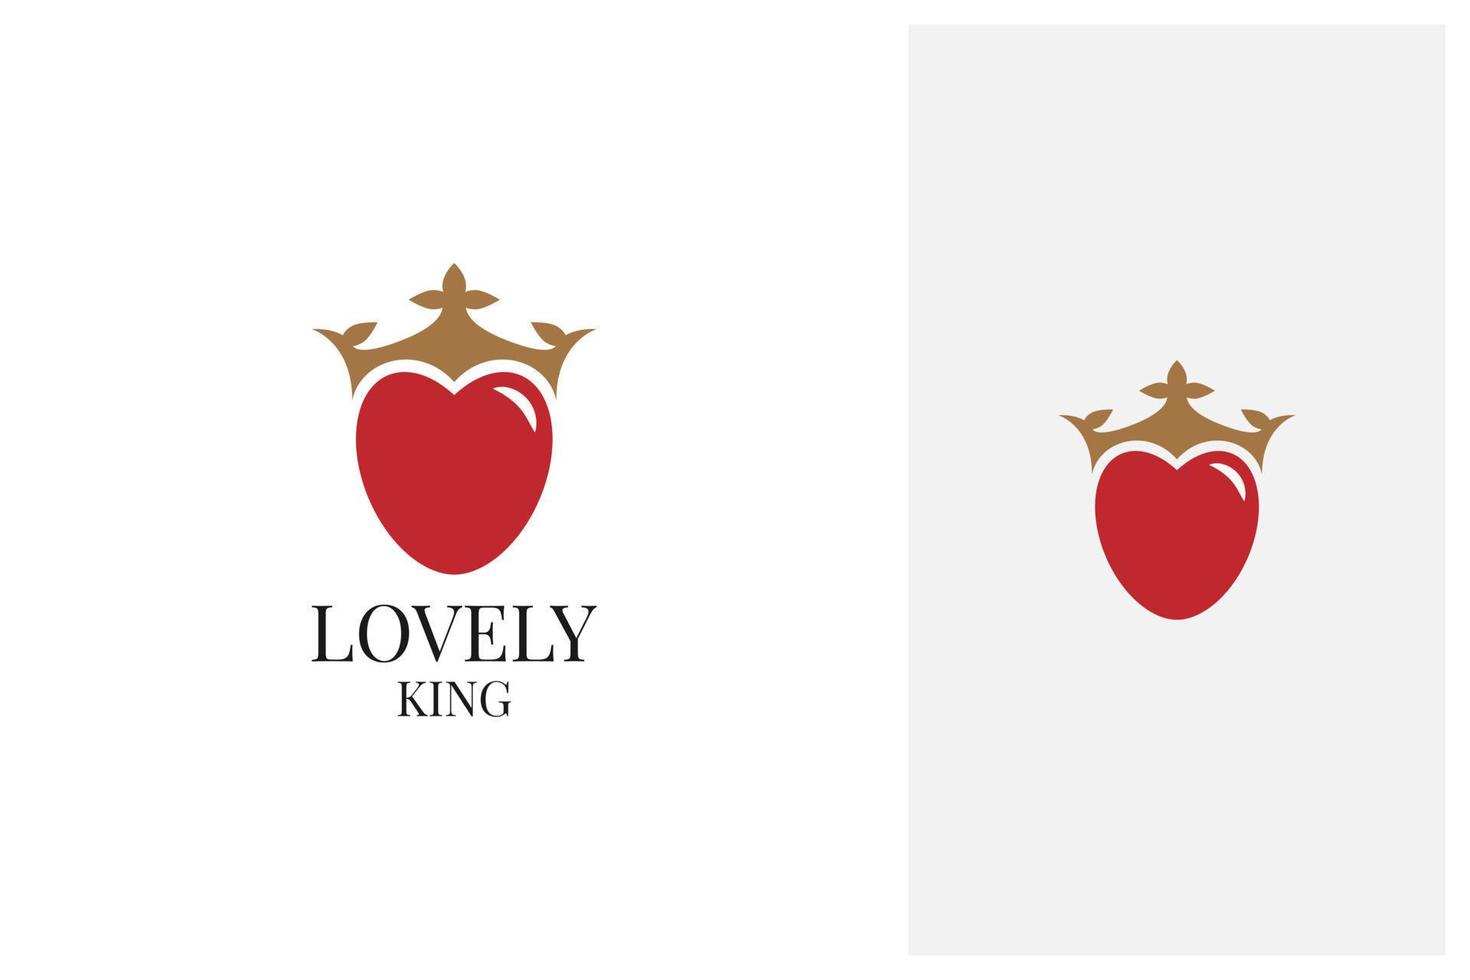 heart and crown king logo design vector